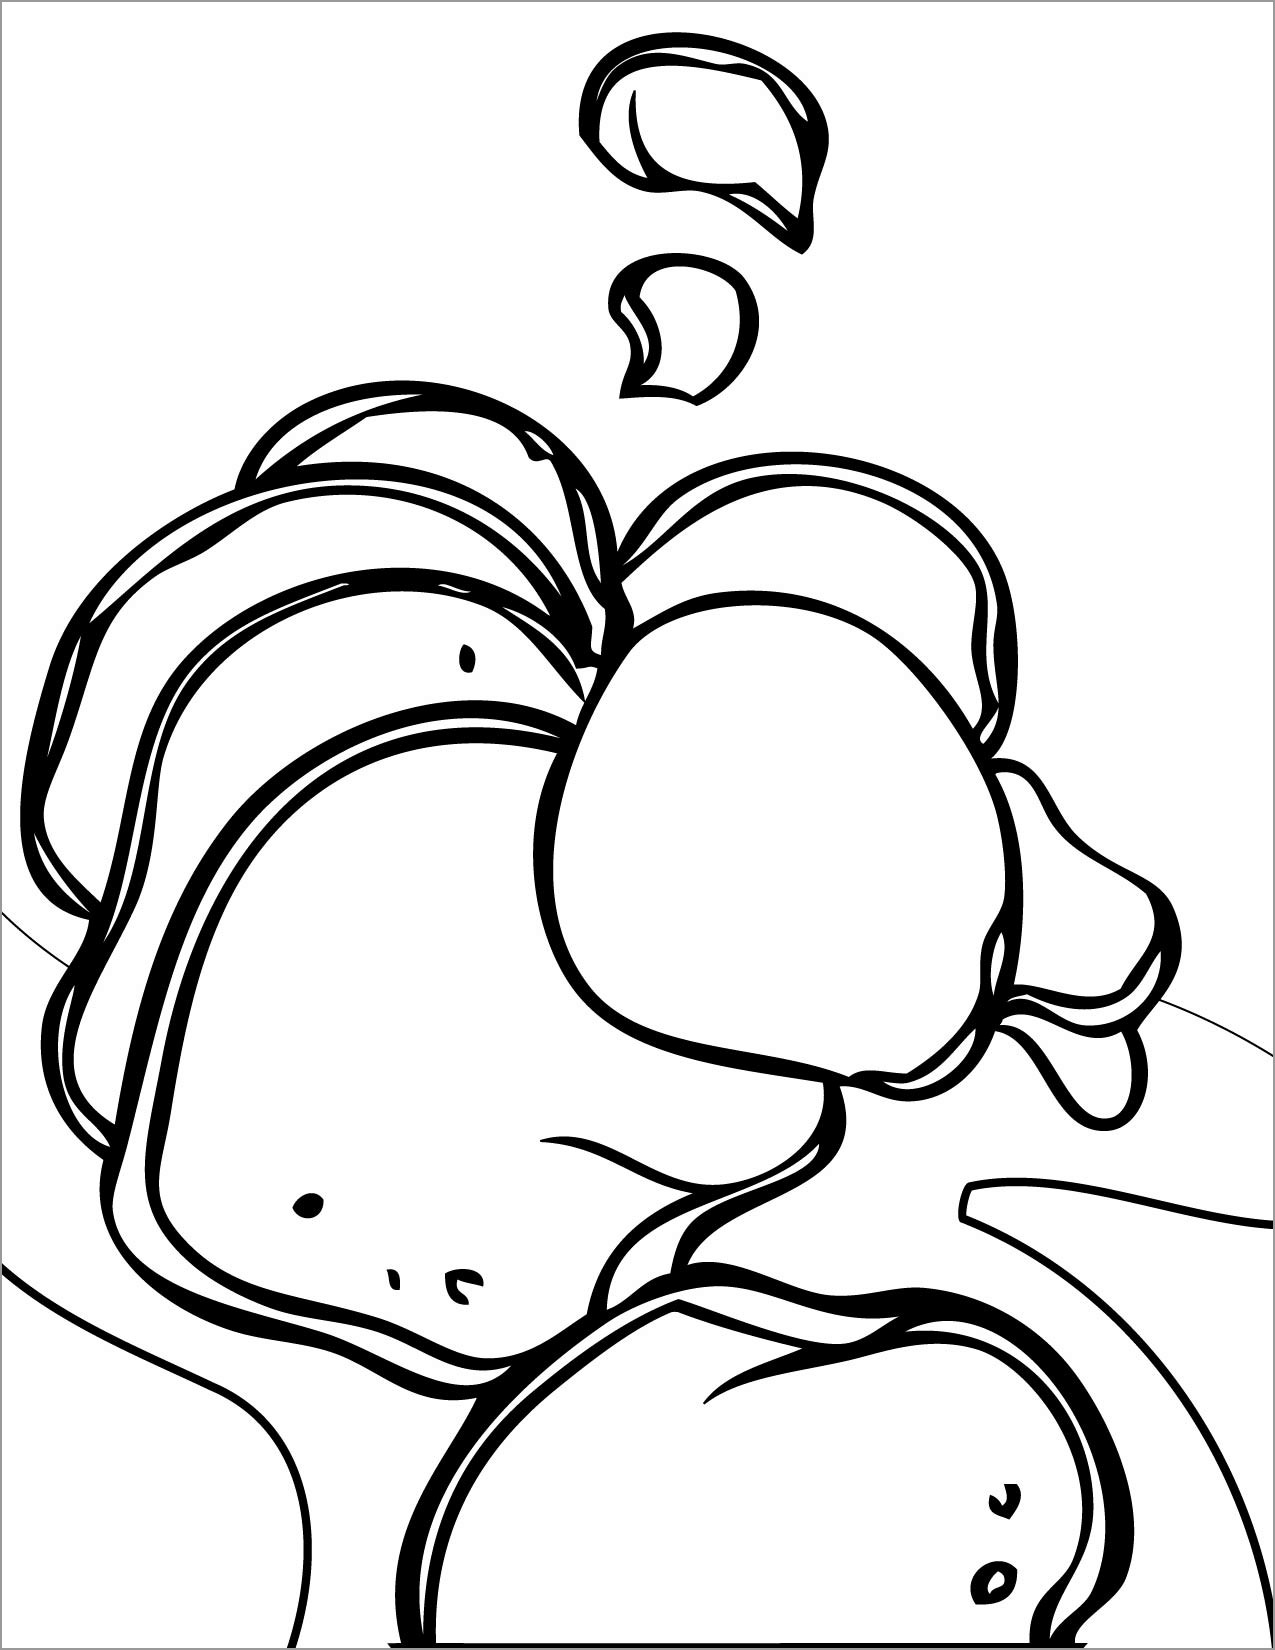 Sliced Potatoes Coloring Page for Kids